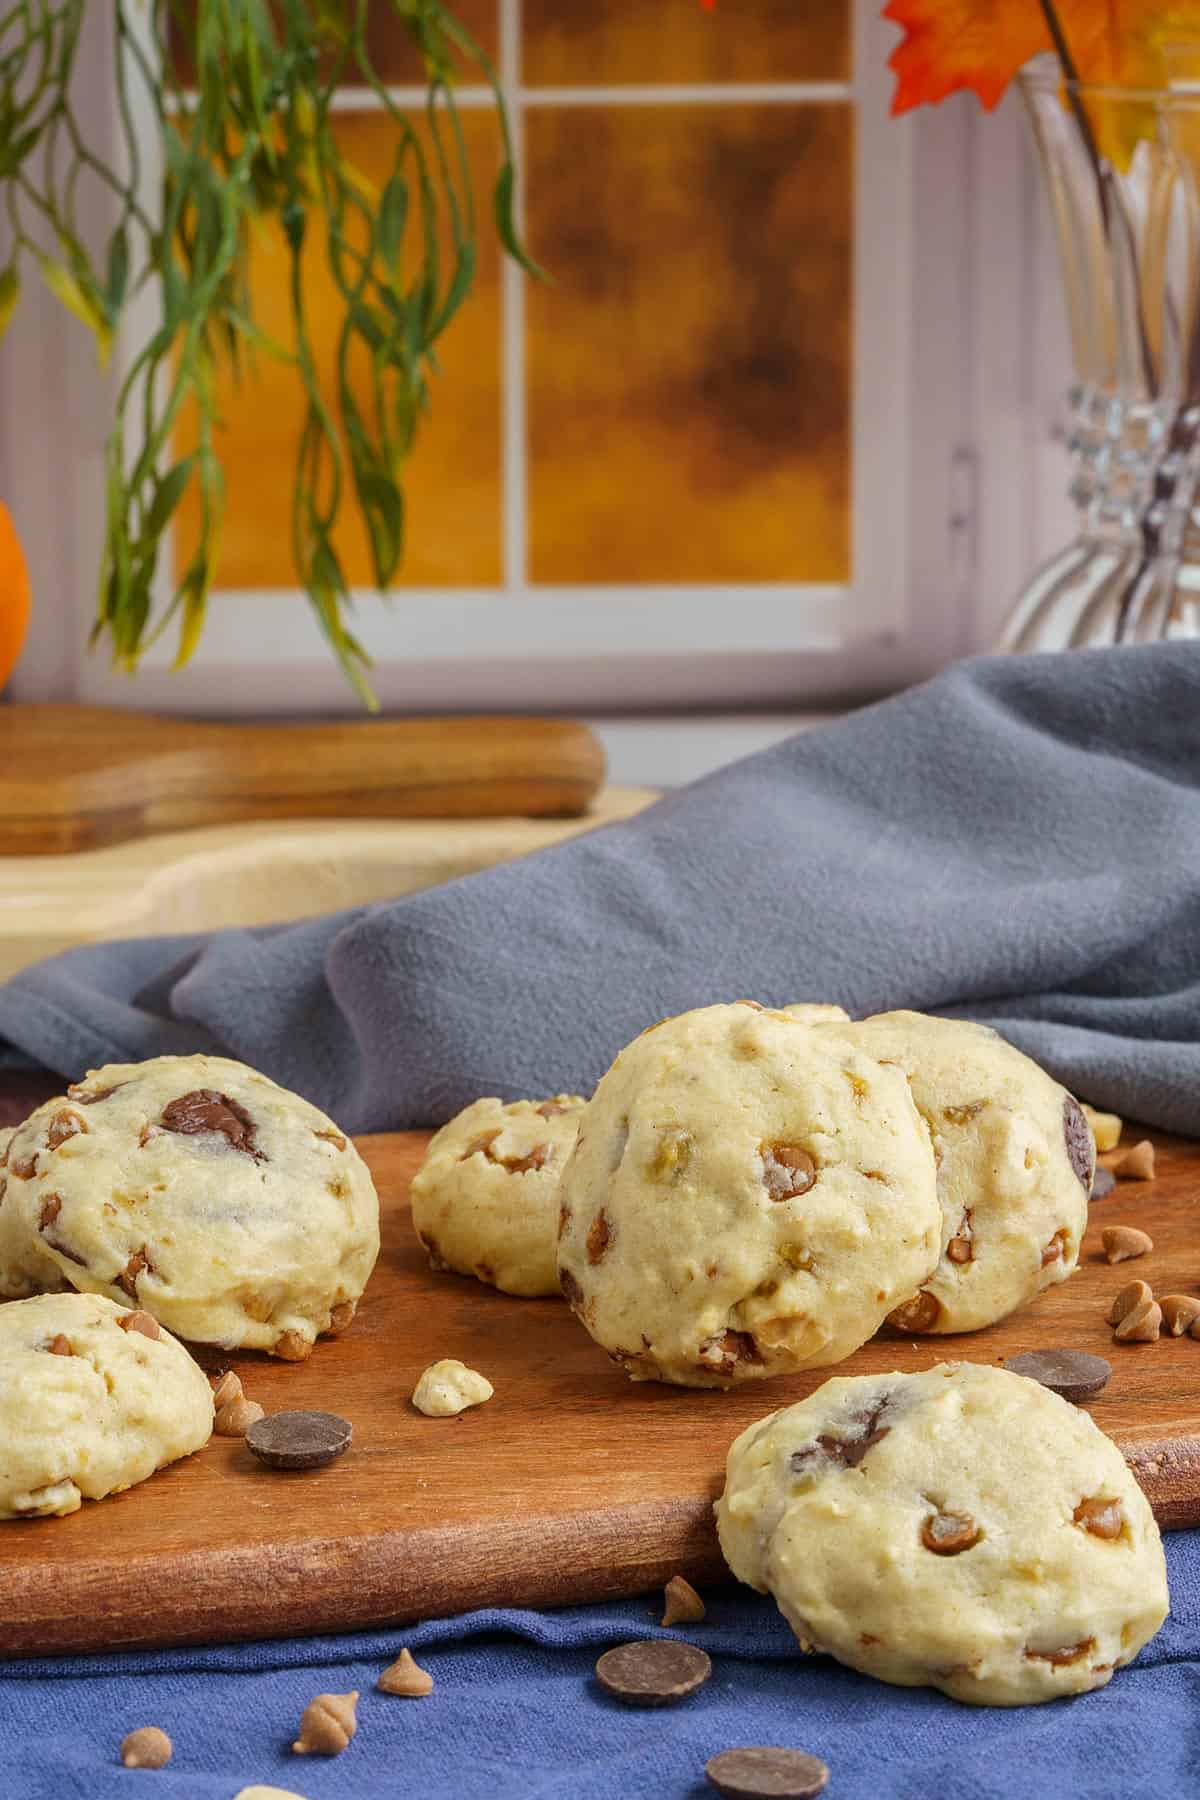 Baked banana with chocolate and caramel chip cookies on a wooden board in front of a window.